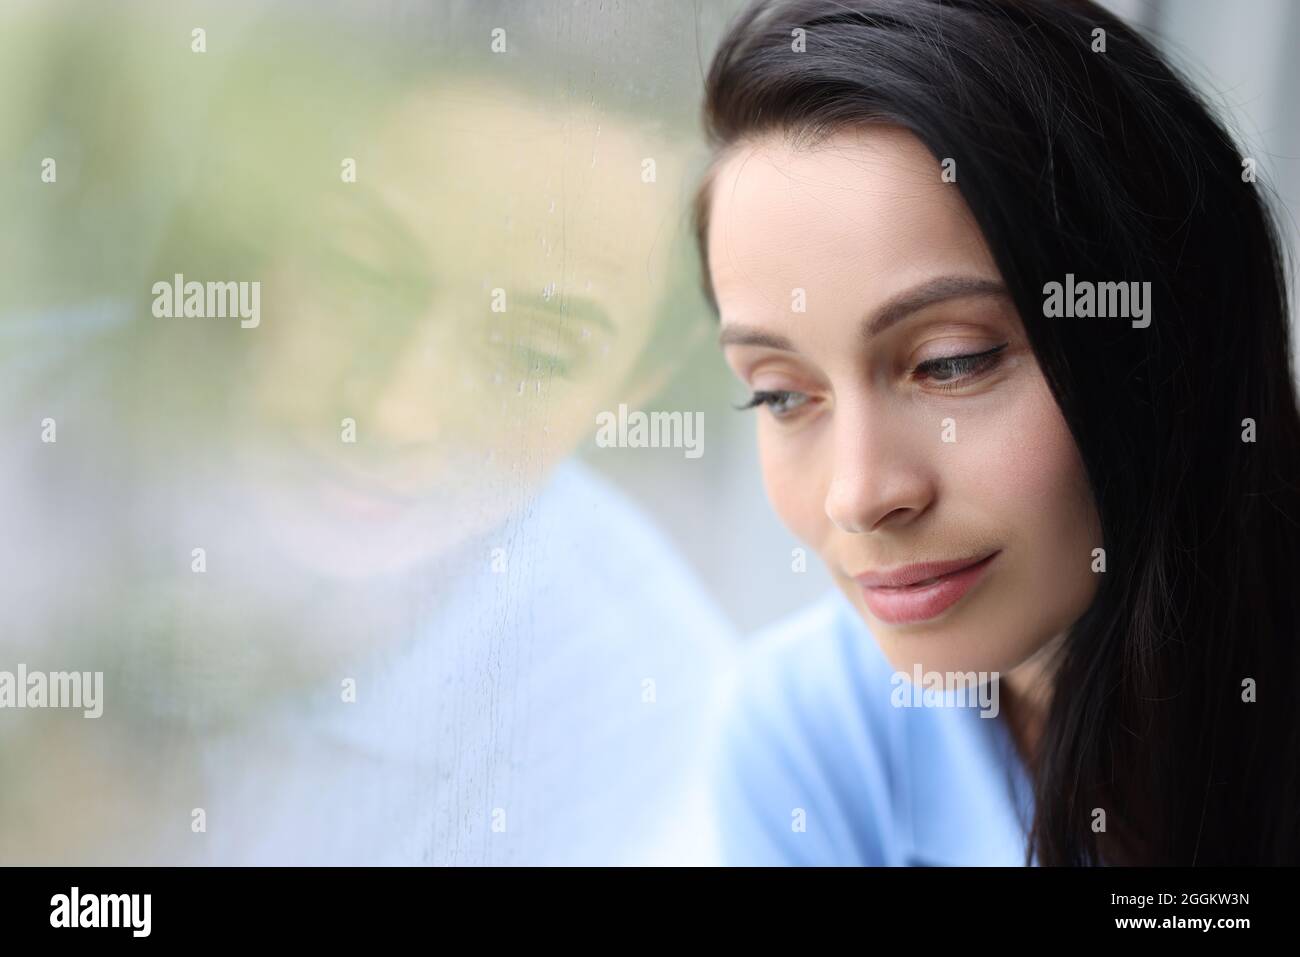 Pensive pensive girl sits alone and looks out window closeup Stock Photo